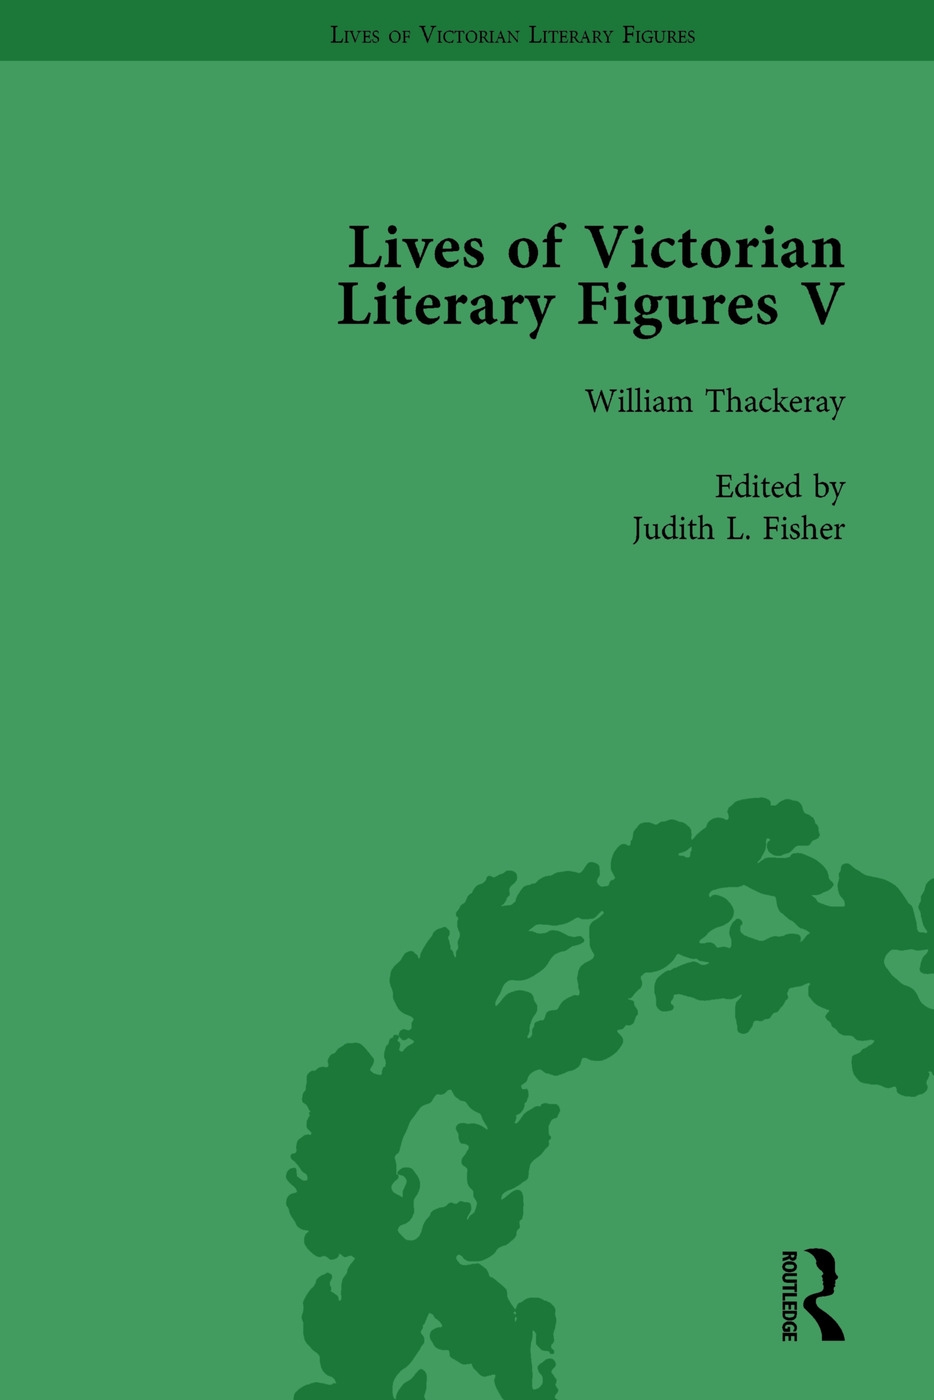 Lives of Victorian Literary Figures, Part V, Volume 3: Mary Elizabeth Braddon, Wilkie Collins and William Thackeray by Their Contemporaries